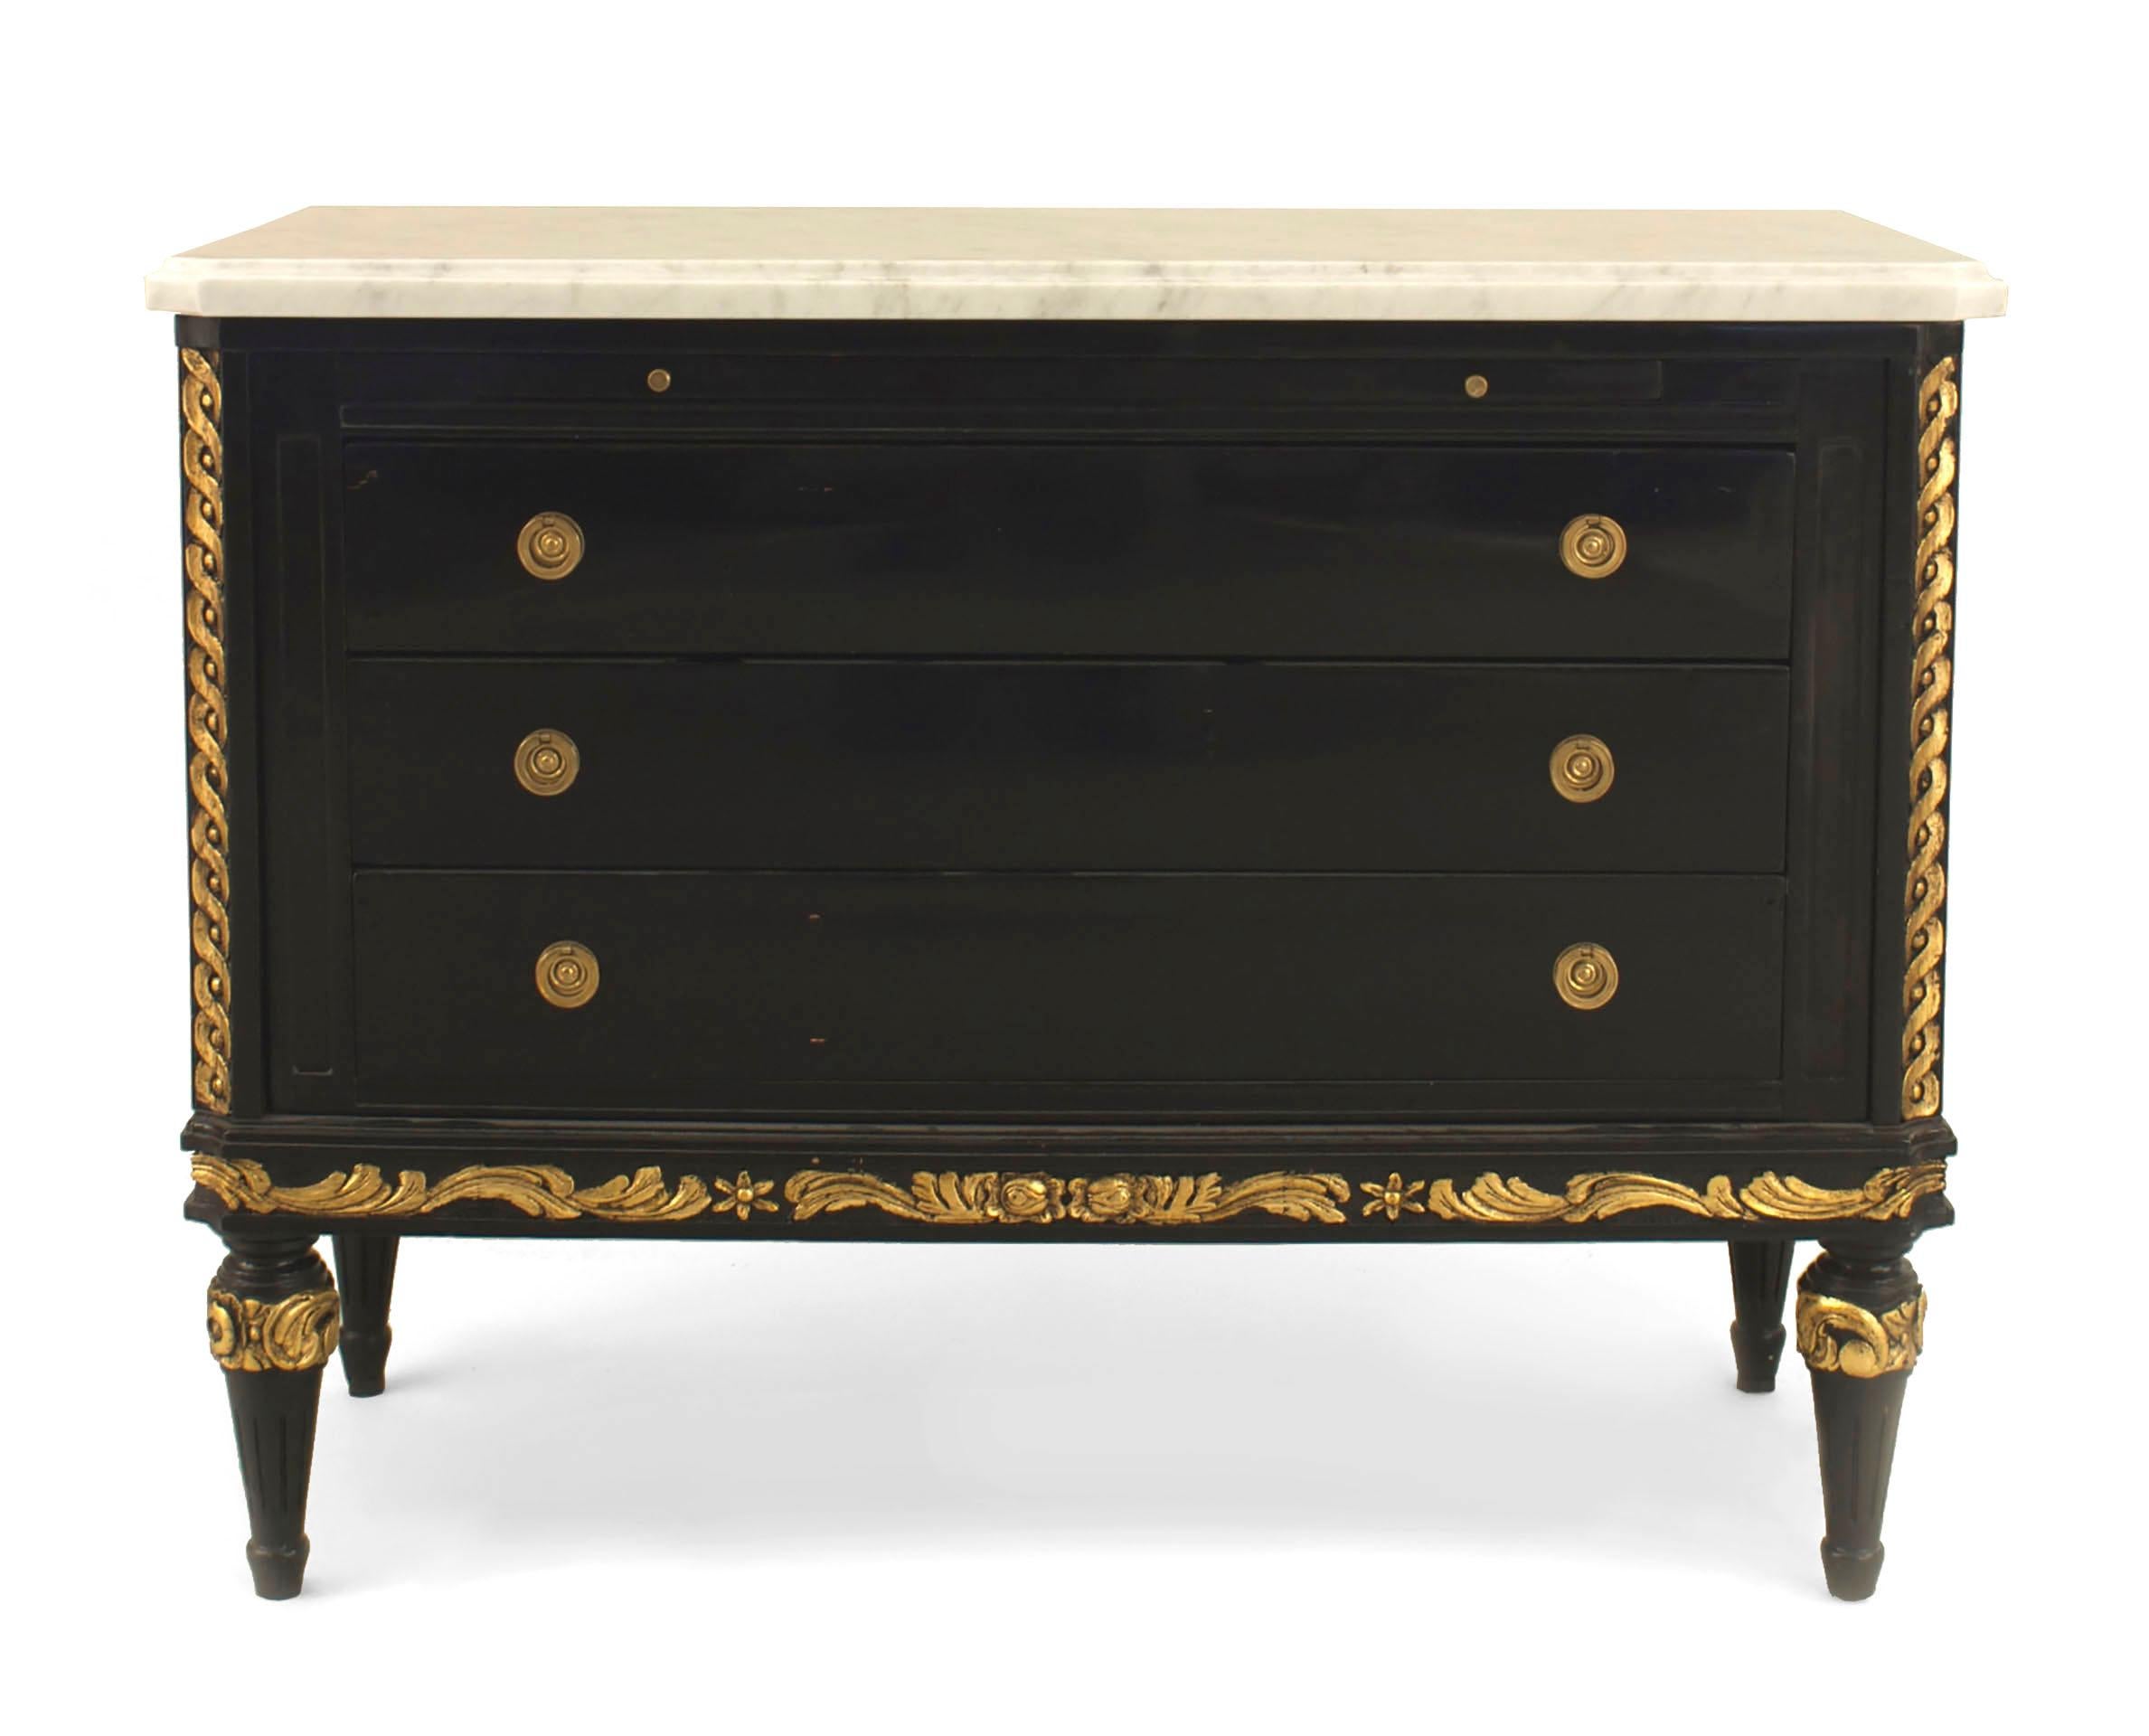 French Louis XVI style (1940s) ebonized chest with gilt carved sides and legs and 3 drawers having ring handles under a front slide shelf and a white marble top (signed: JANSEN)
